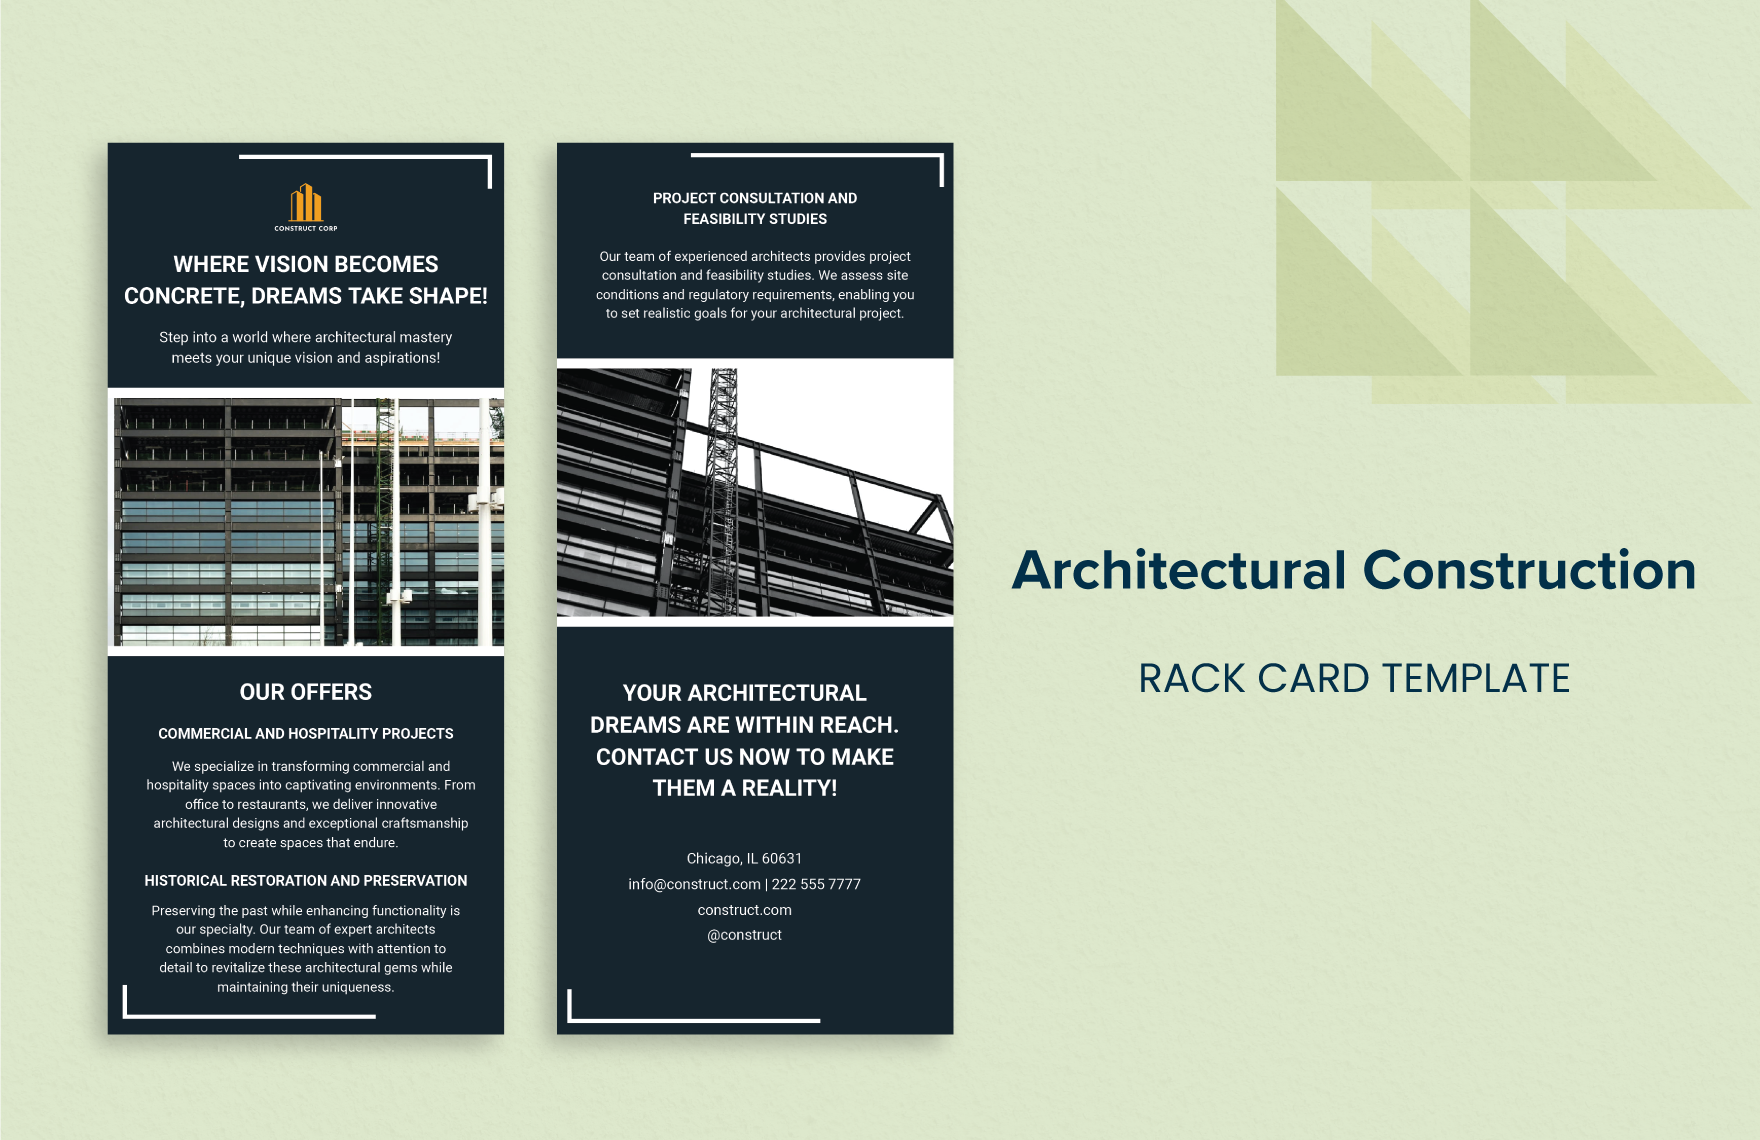 Architectural Construction Rack Card Template